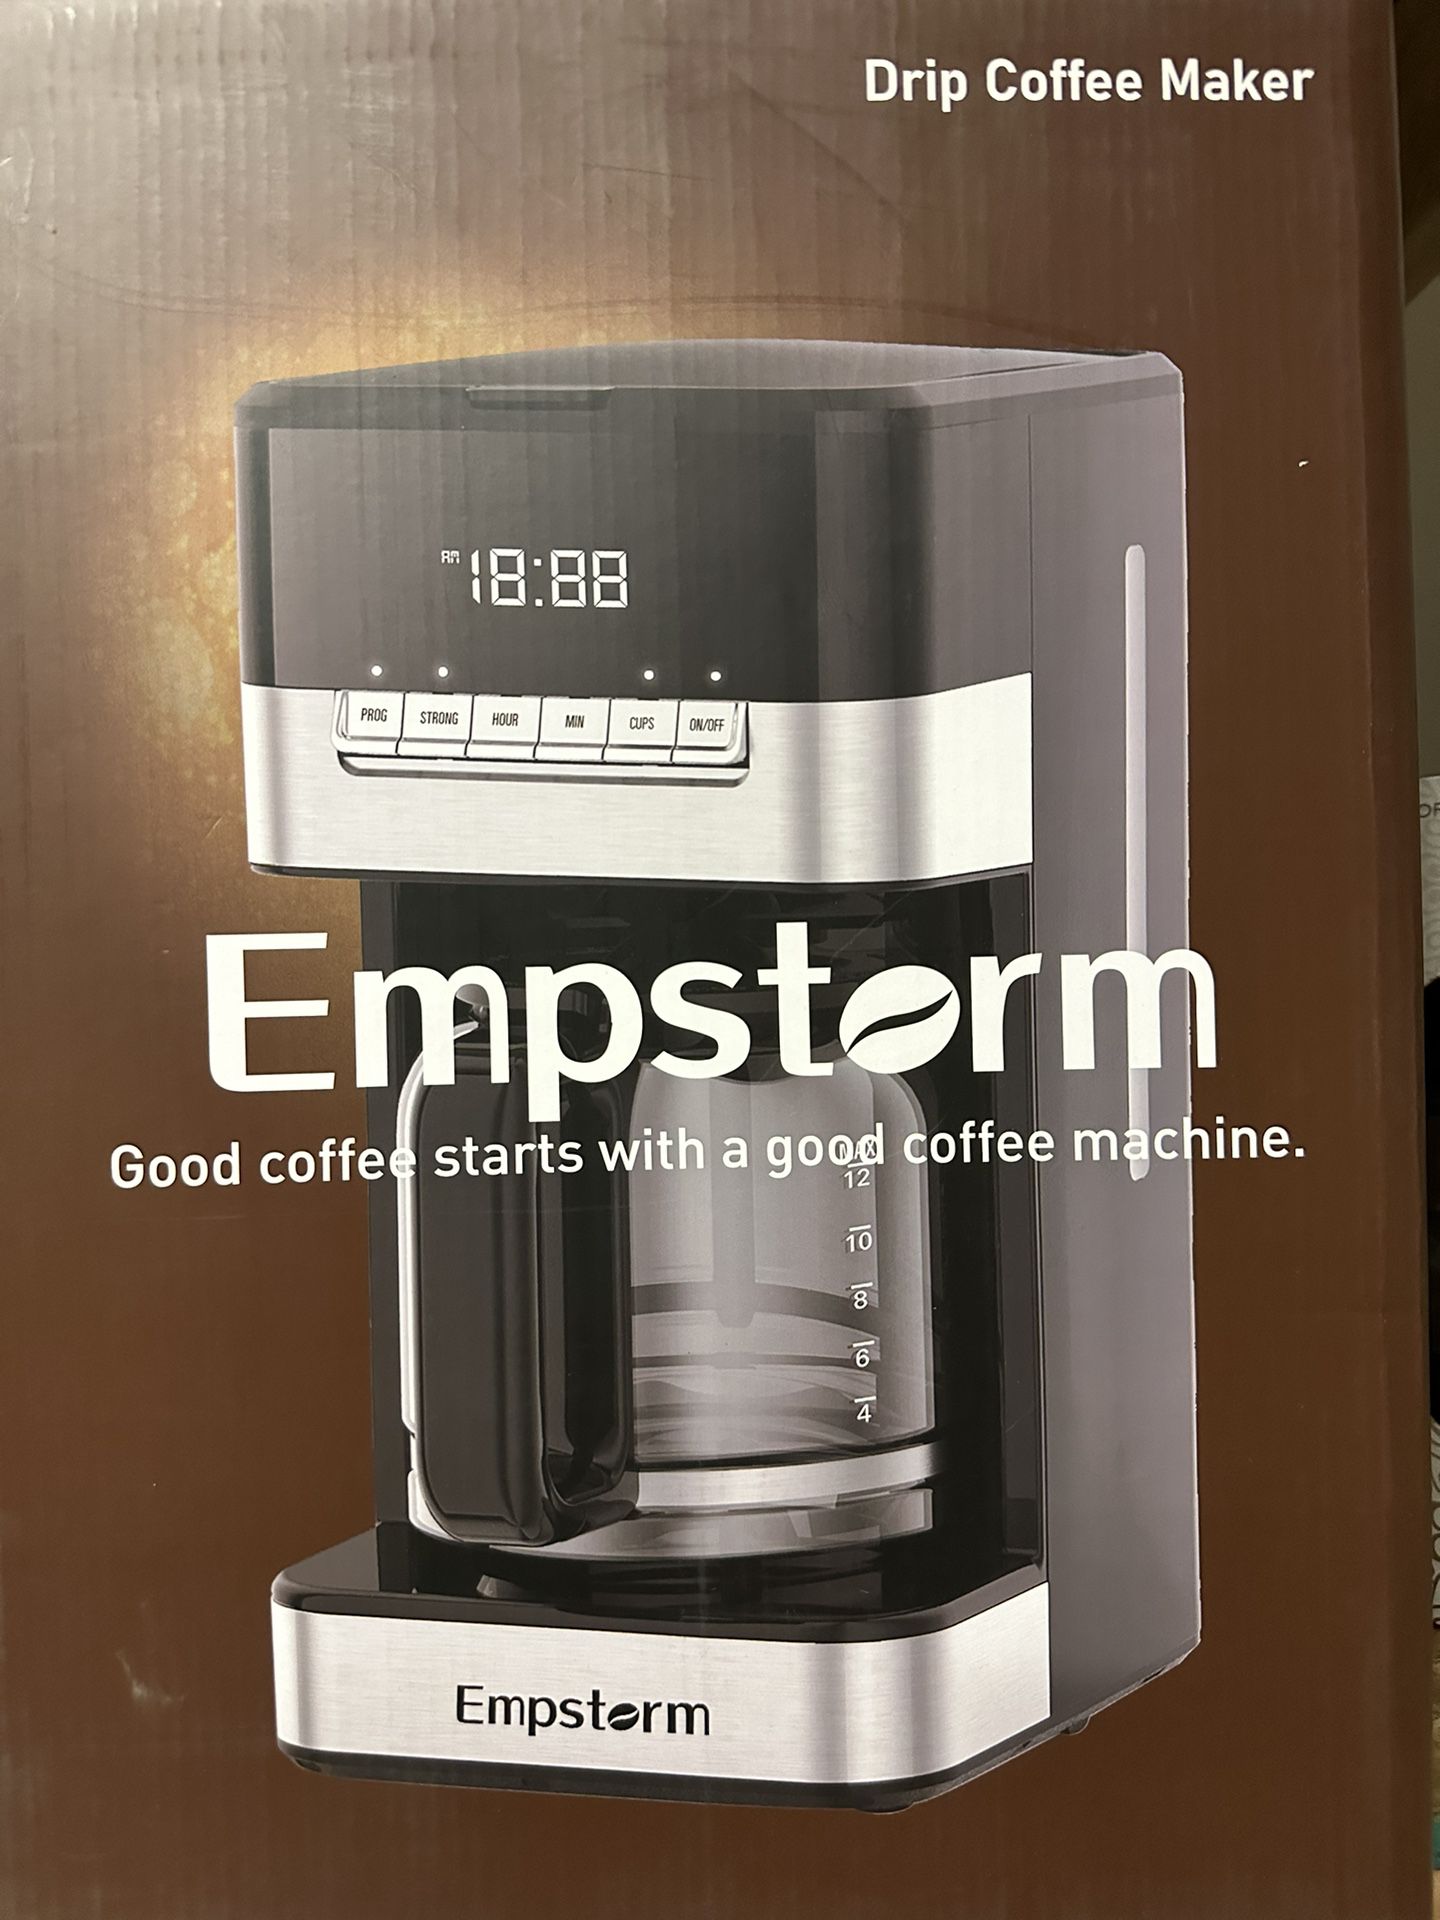 Empstorm 4-12 Cup Programmable Drip Coffee Maker, 1000W Coffee Machine with Glass Carafe, Black with Stainless Steel Accents